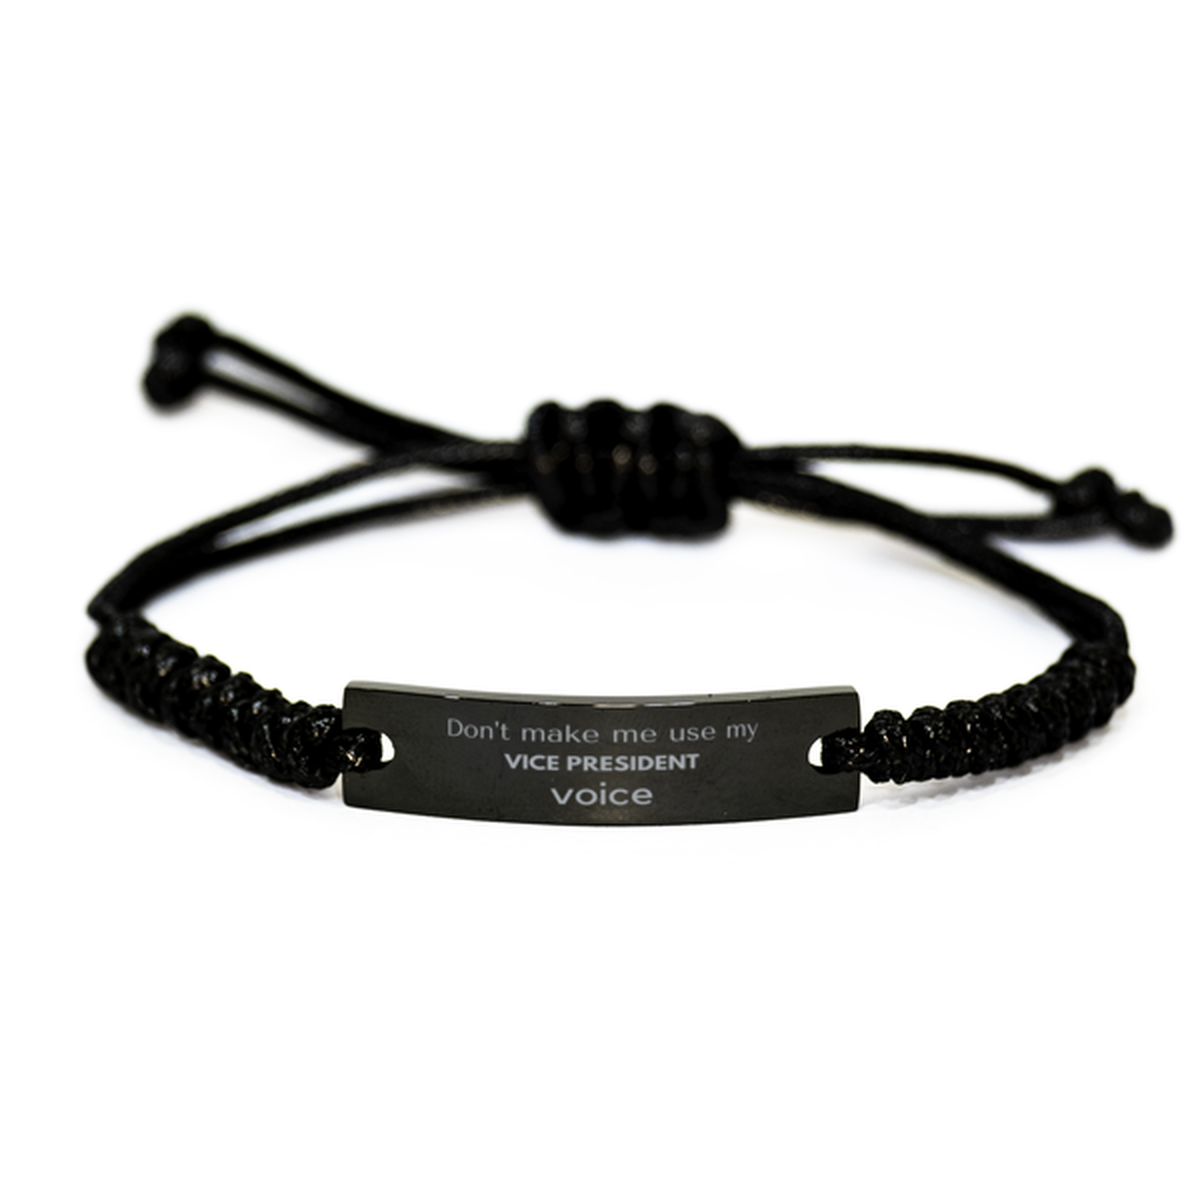 Don't make me use my Vice President voice, Sarcasm Vice President Gifts, Christmas Vice President Black Rope Bracelet Birthday Unique Gifts For Vice President Coworkers, Men, Women, Colleague, Friends